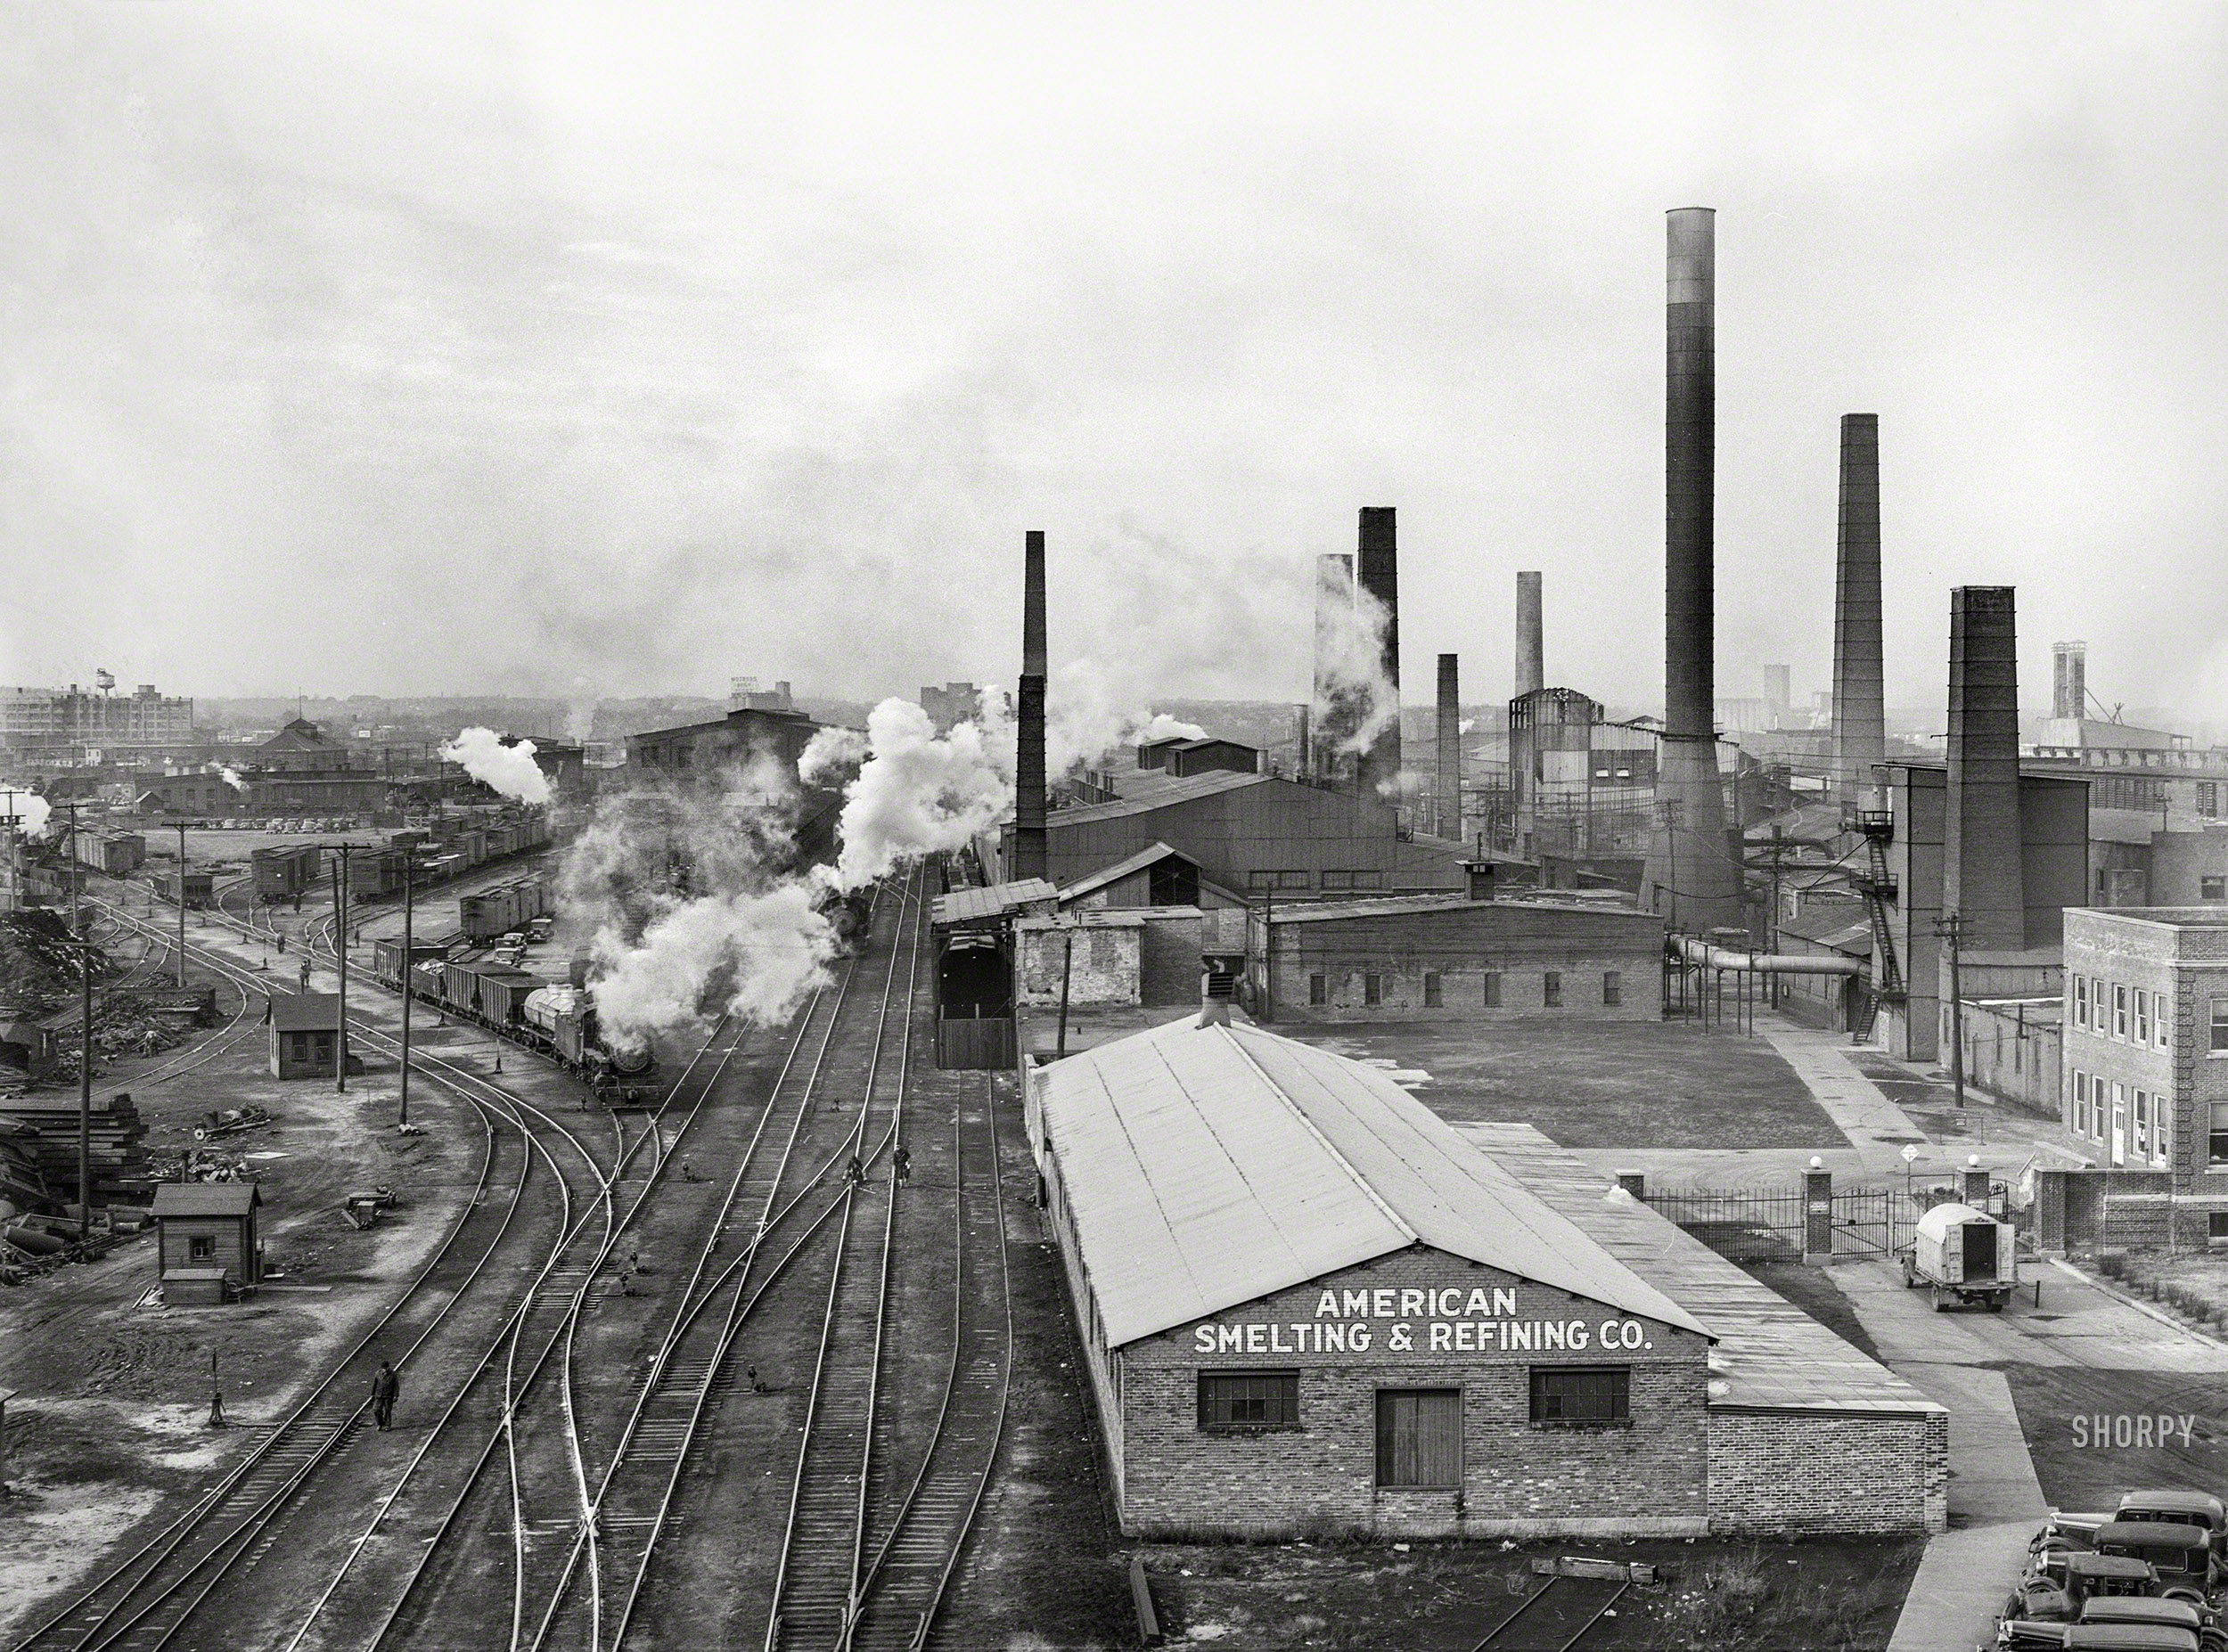 November 1938. "Largest smelting furnace in the world. Omaha, Nebraska." Photo by John Vachon for the Farm Security Administration. View full size.